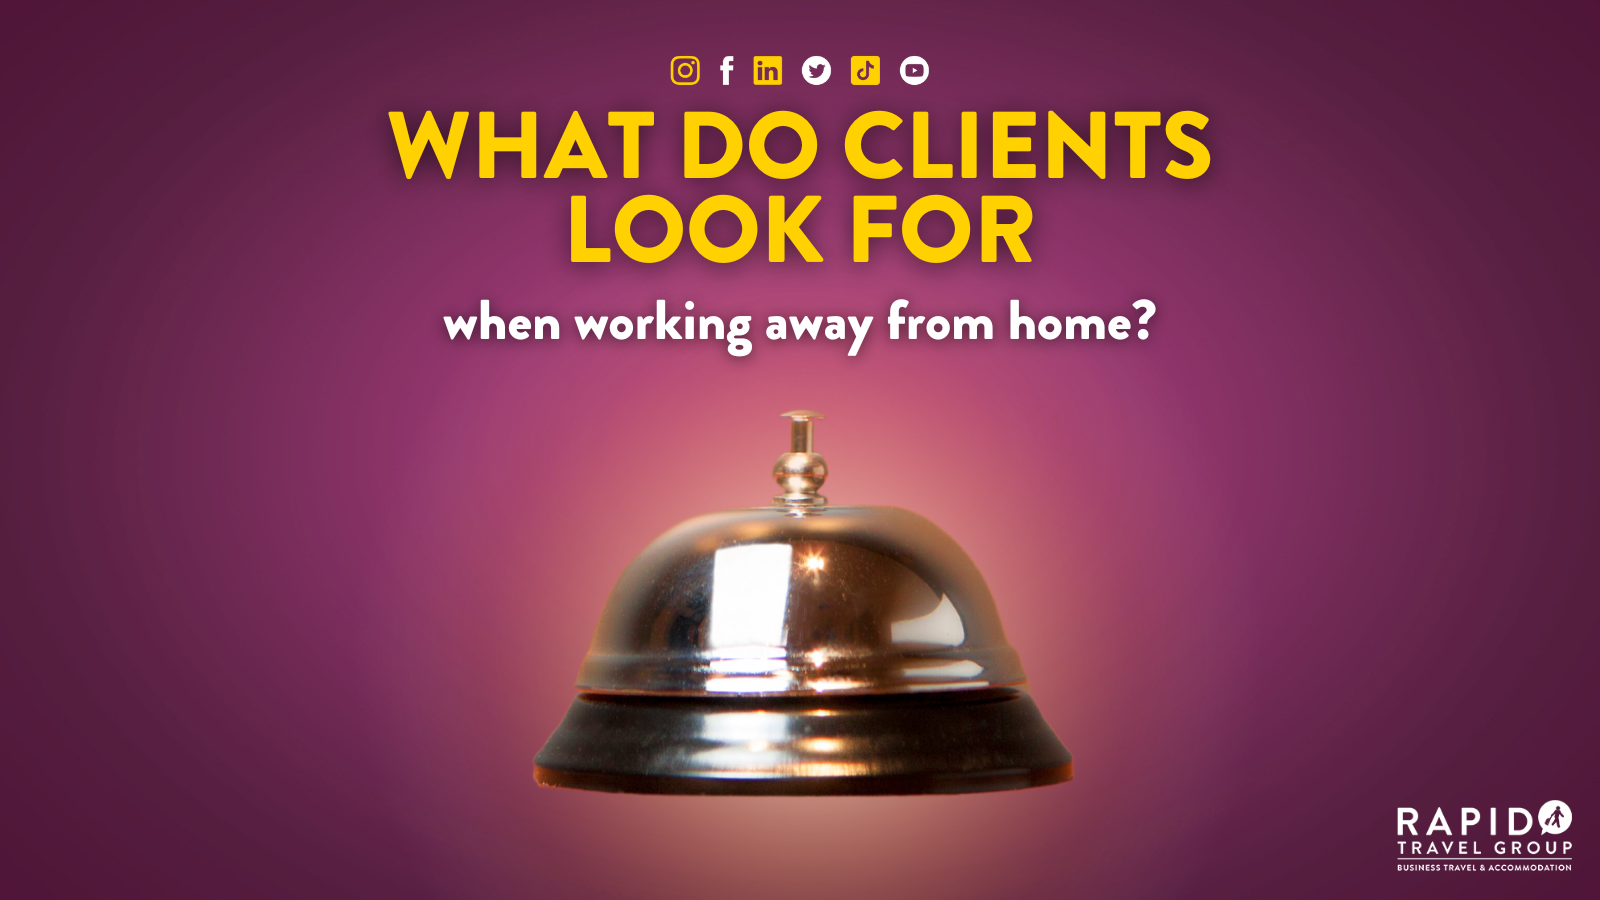 what do clients look for when working away from home?